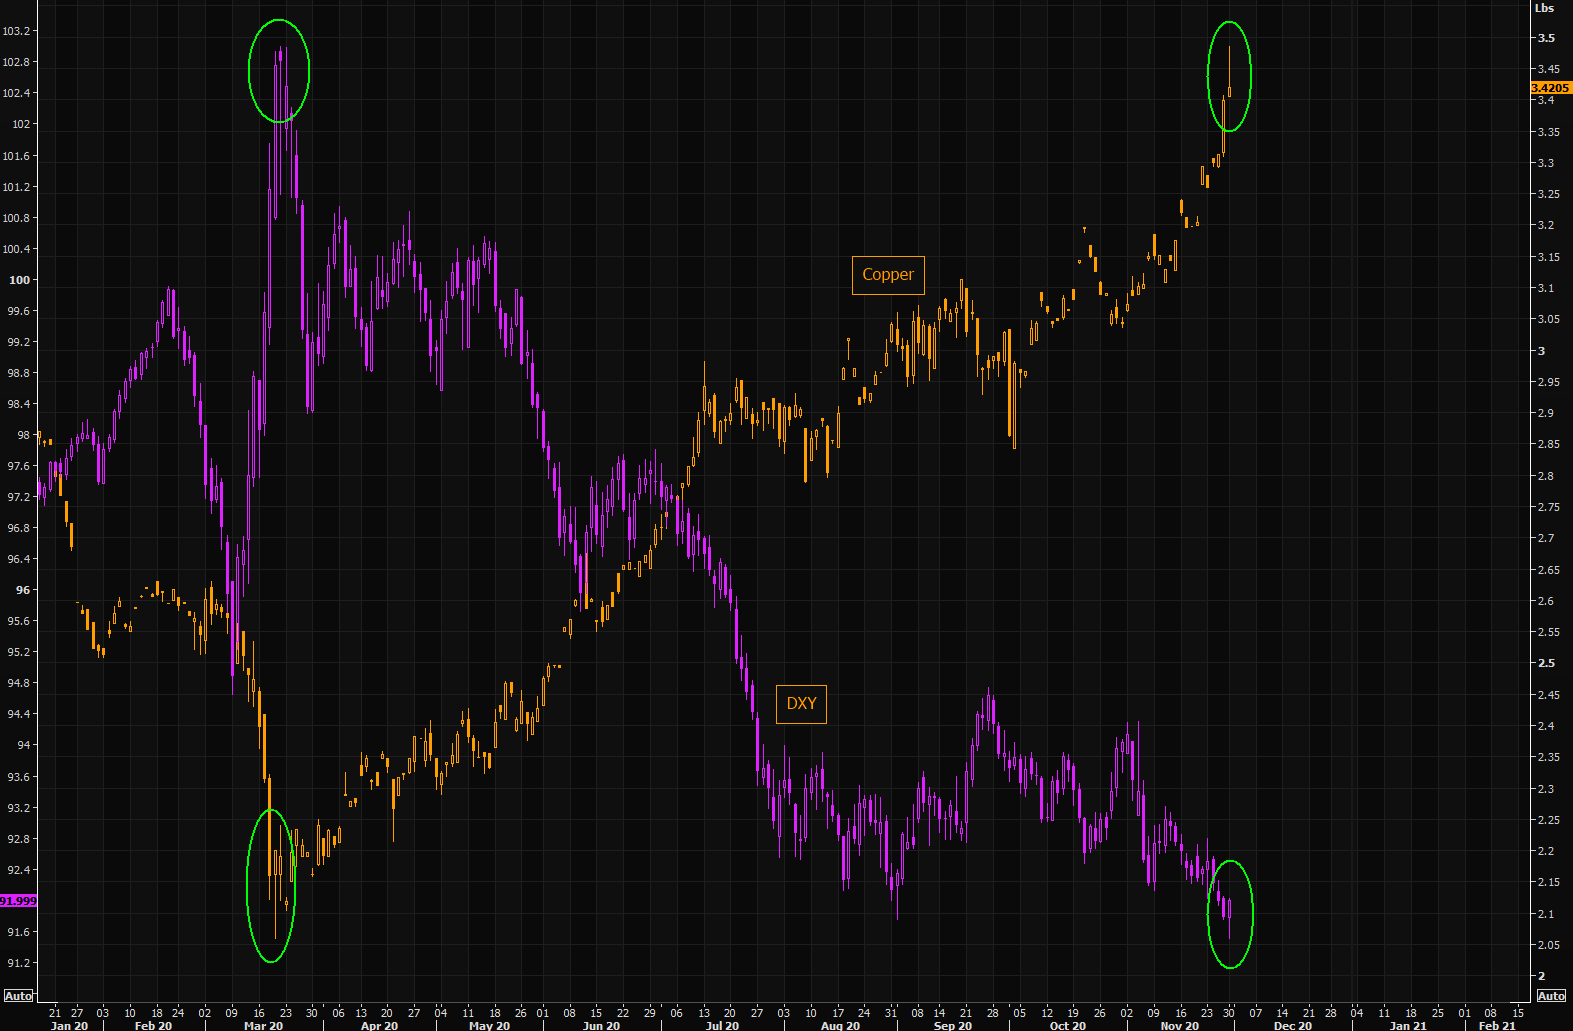 The question of the day - did DXY and copper both reverse today?